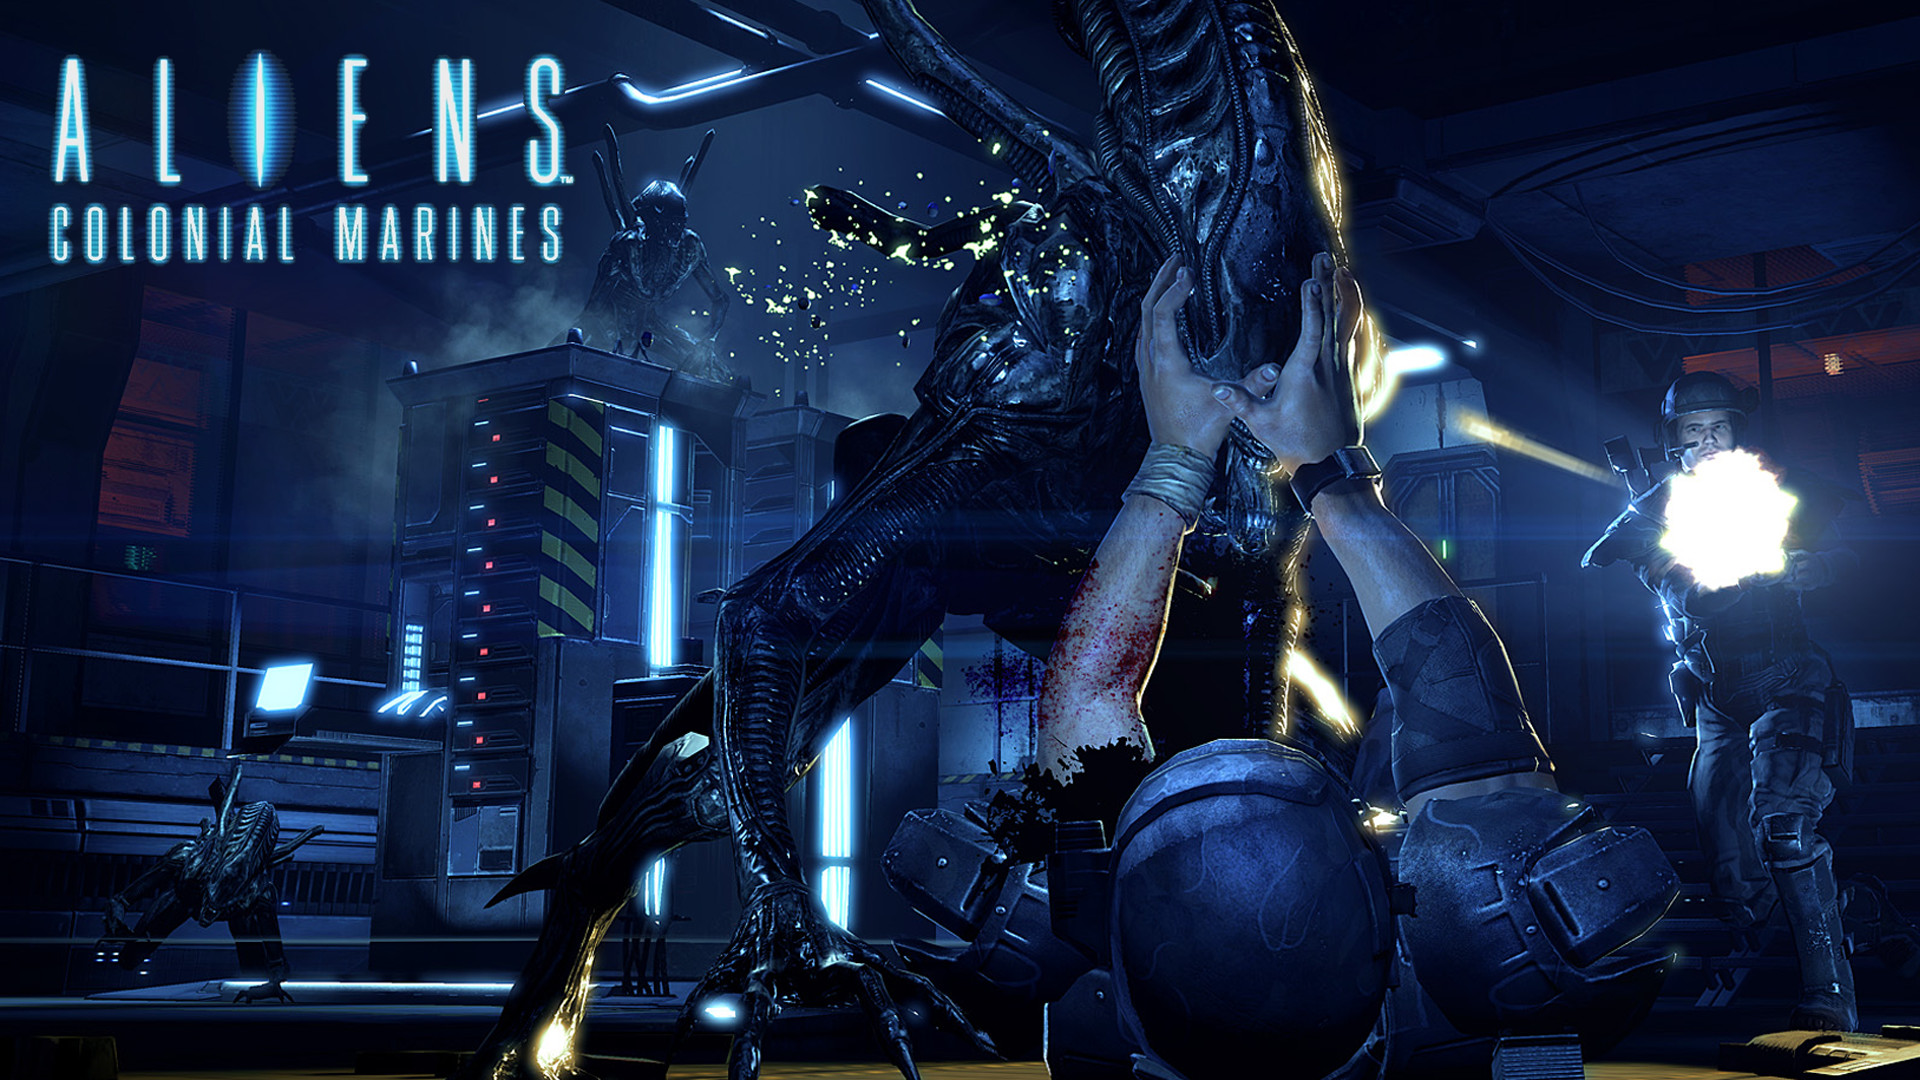 1920x1080 ... Live Aliens Colonial Marines Wallpapers | Aliens Colonial Marines  Wallpapers Collection ...